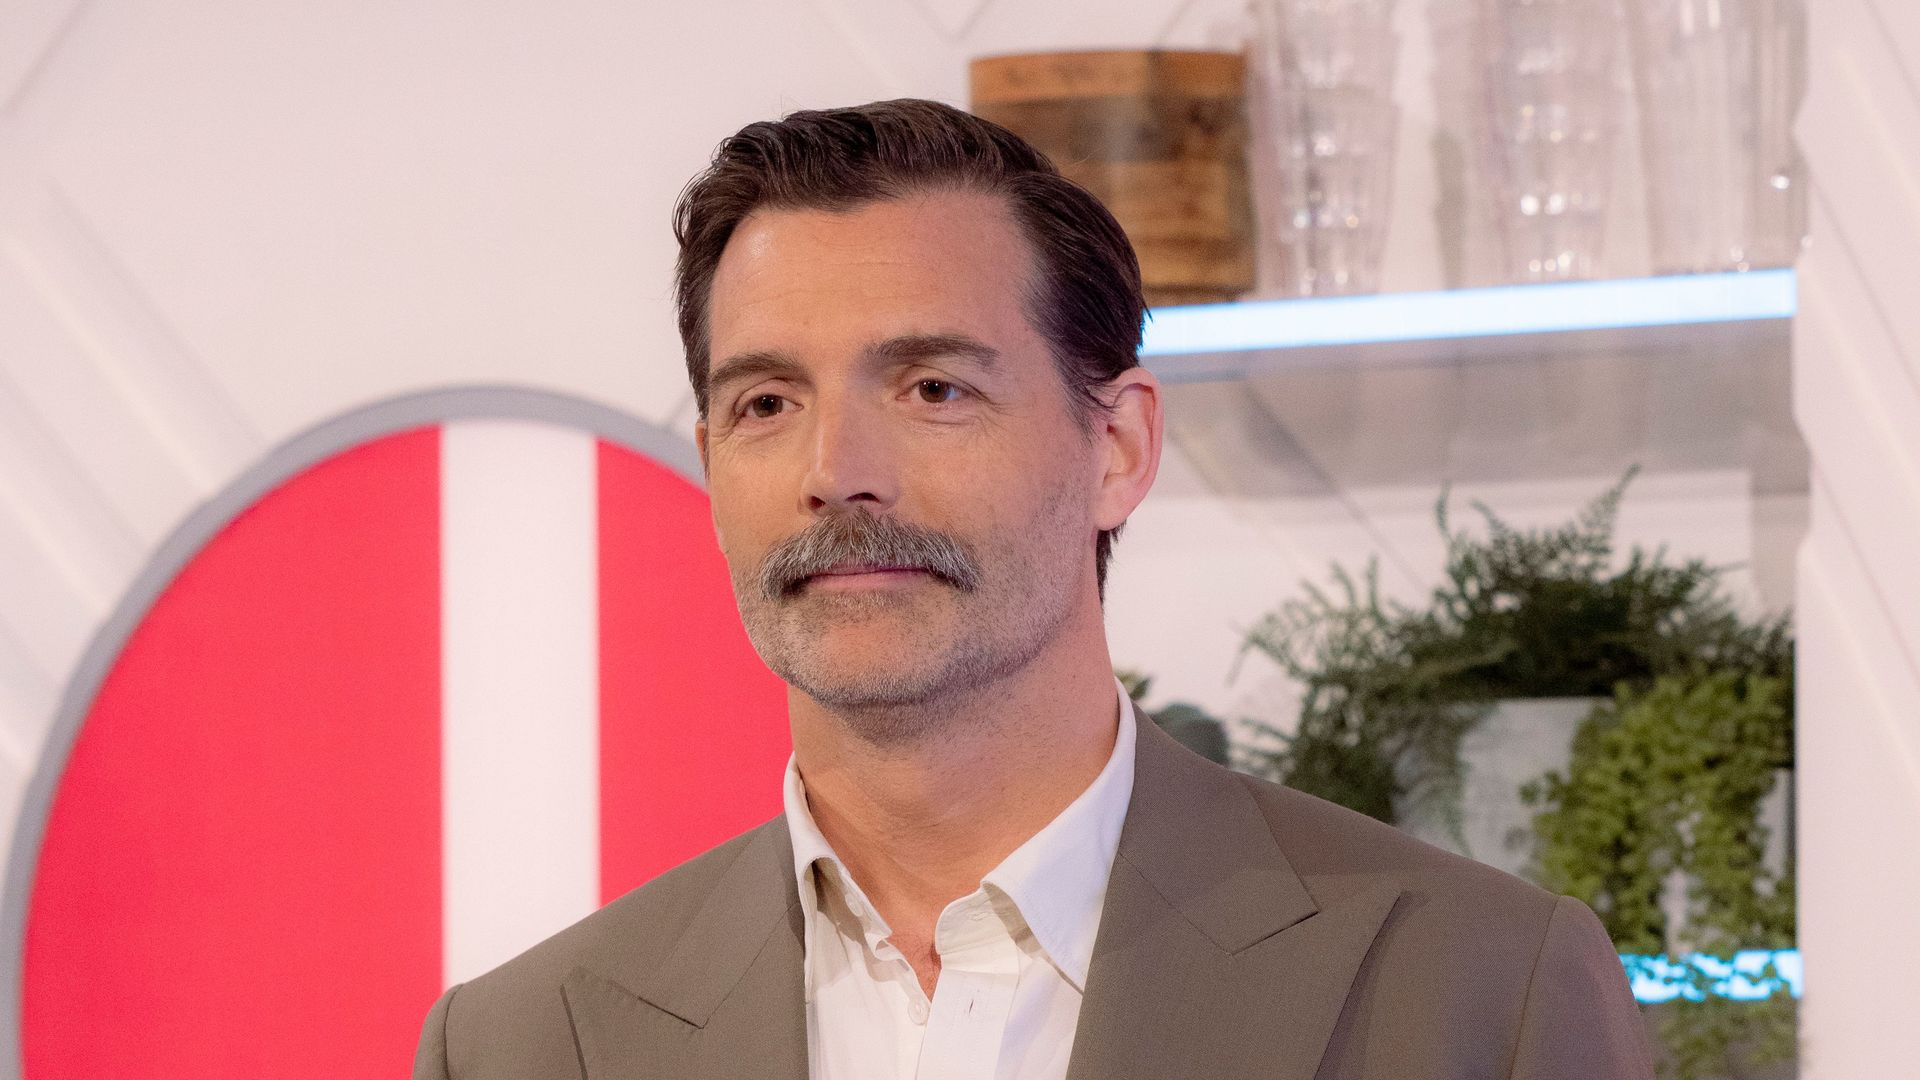 Patrick Grant breaks down over 'unecessary' family death in ...